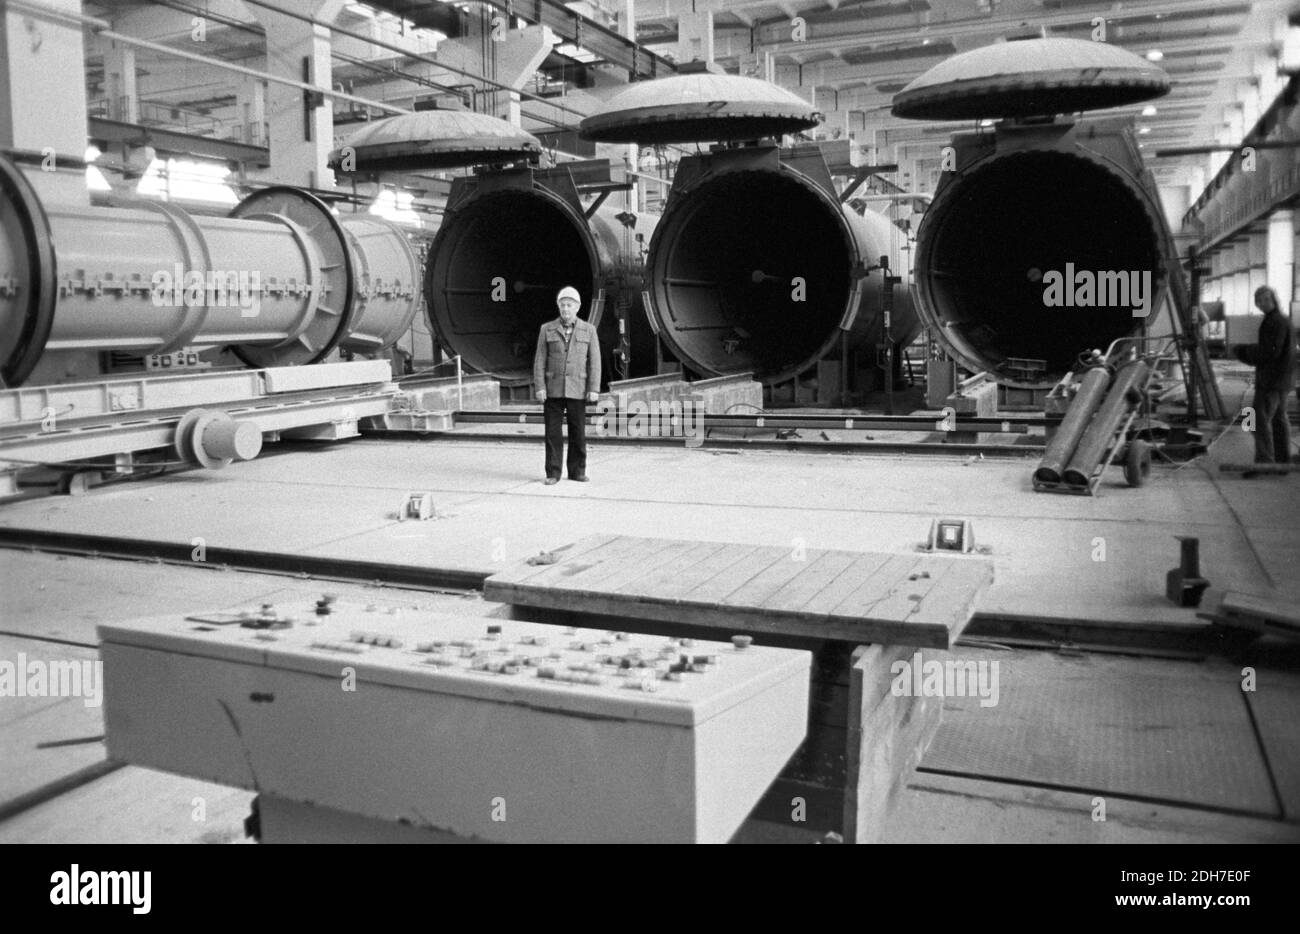 30 November 1981, Saxony, Laußig: A new prestressed concrete pressure pipe plant started production in the early 1980s at VEB Betonwerk Laußig within the VEB Leichtbaukombinat Dresden. Concrete elements were manufactured here according to a French process. Exact date of recording not known. Photo: Volkmar Heinz/dpa-Zentralbild/ZB Stock Photo